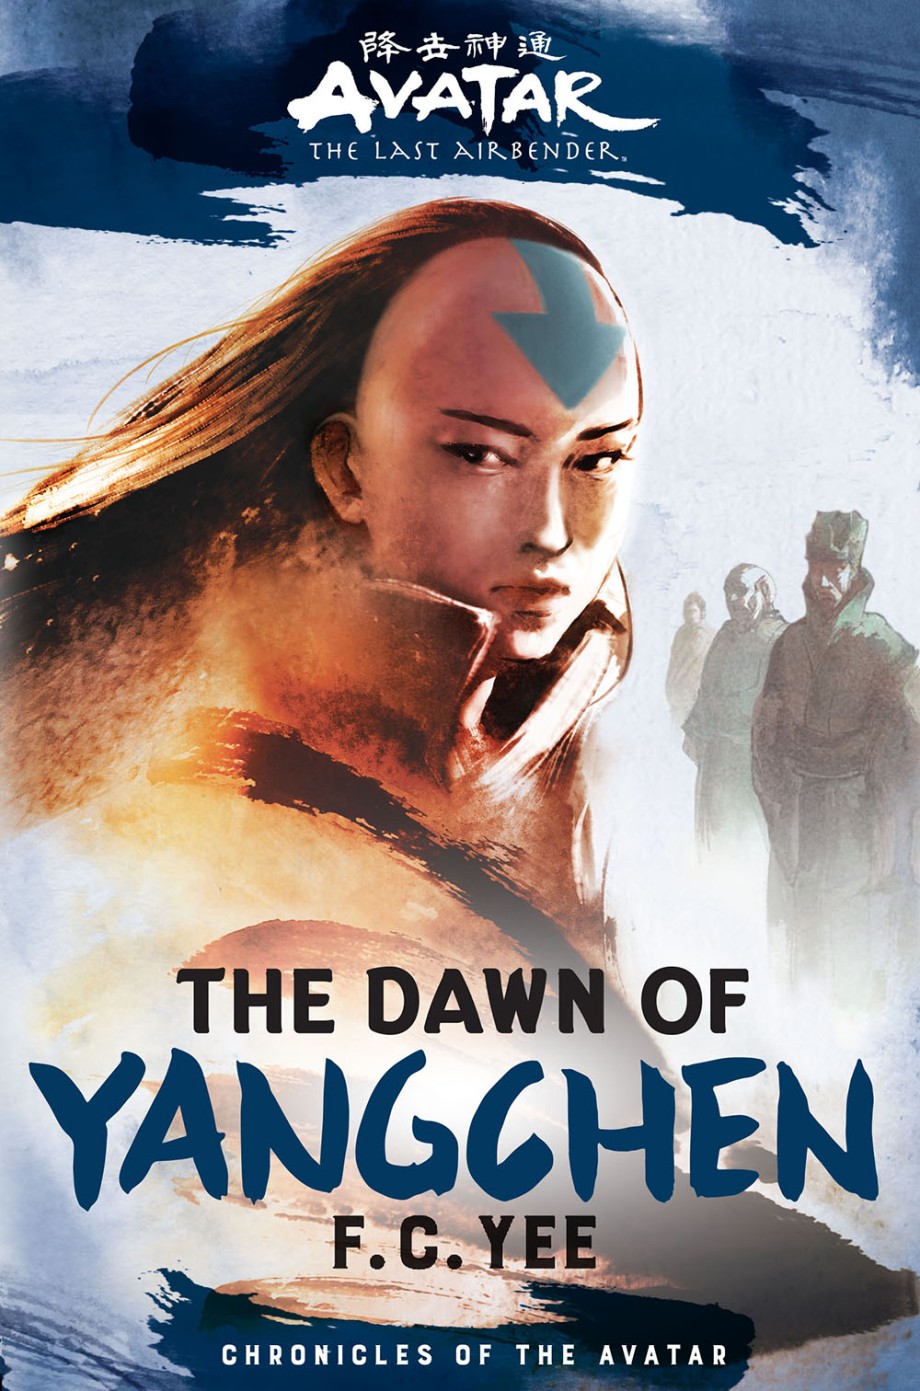 Avatar, The Last Airbender: The Dawn of Yangchen (Chronicles of the Avatar  Book 3) (Hardcover) | ABRAMS